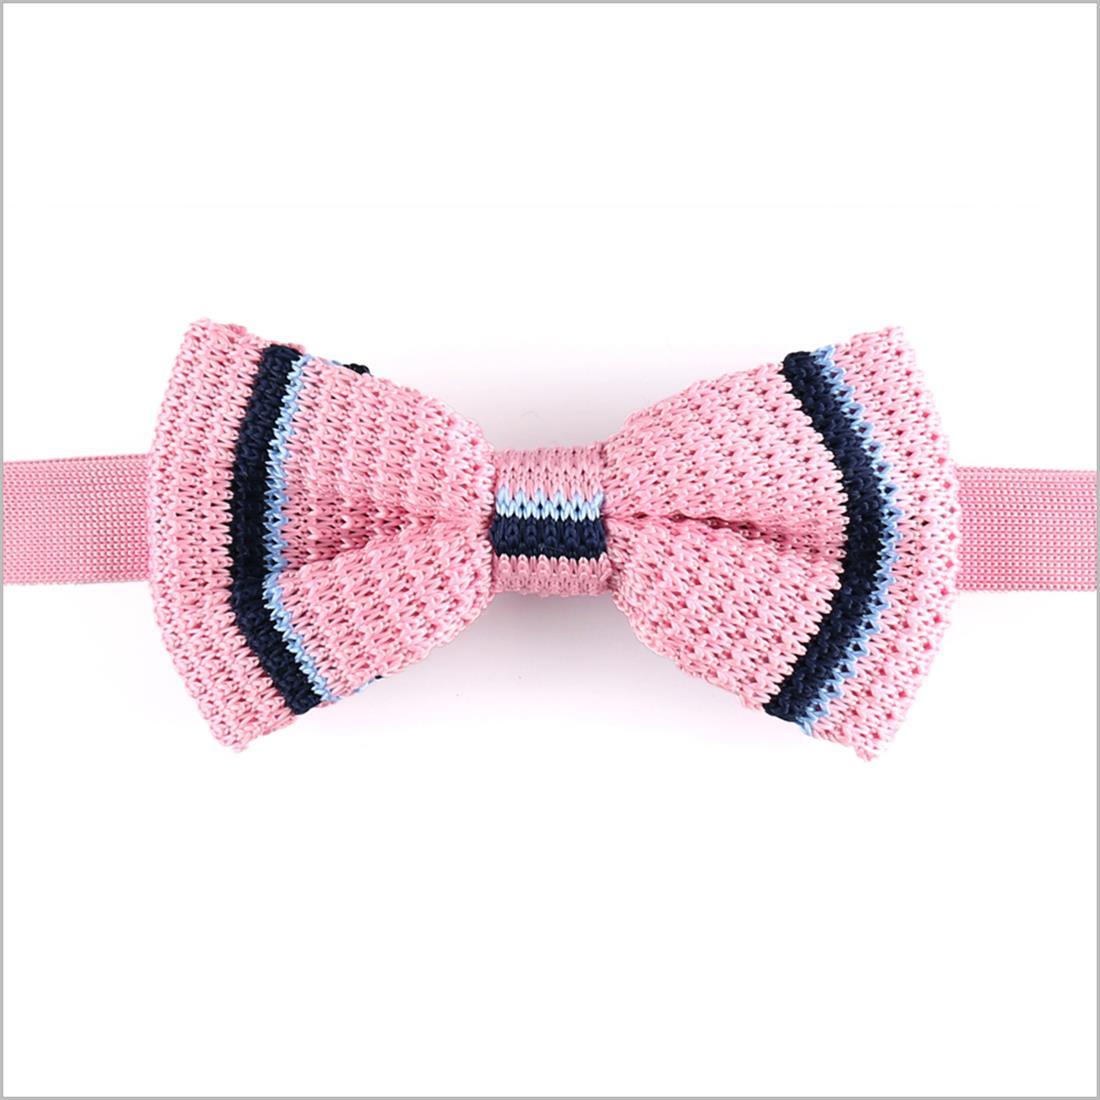 High Quality Men's Polyester Knitted Bow Tie (YWZJ 68)